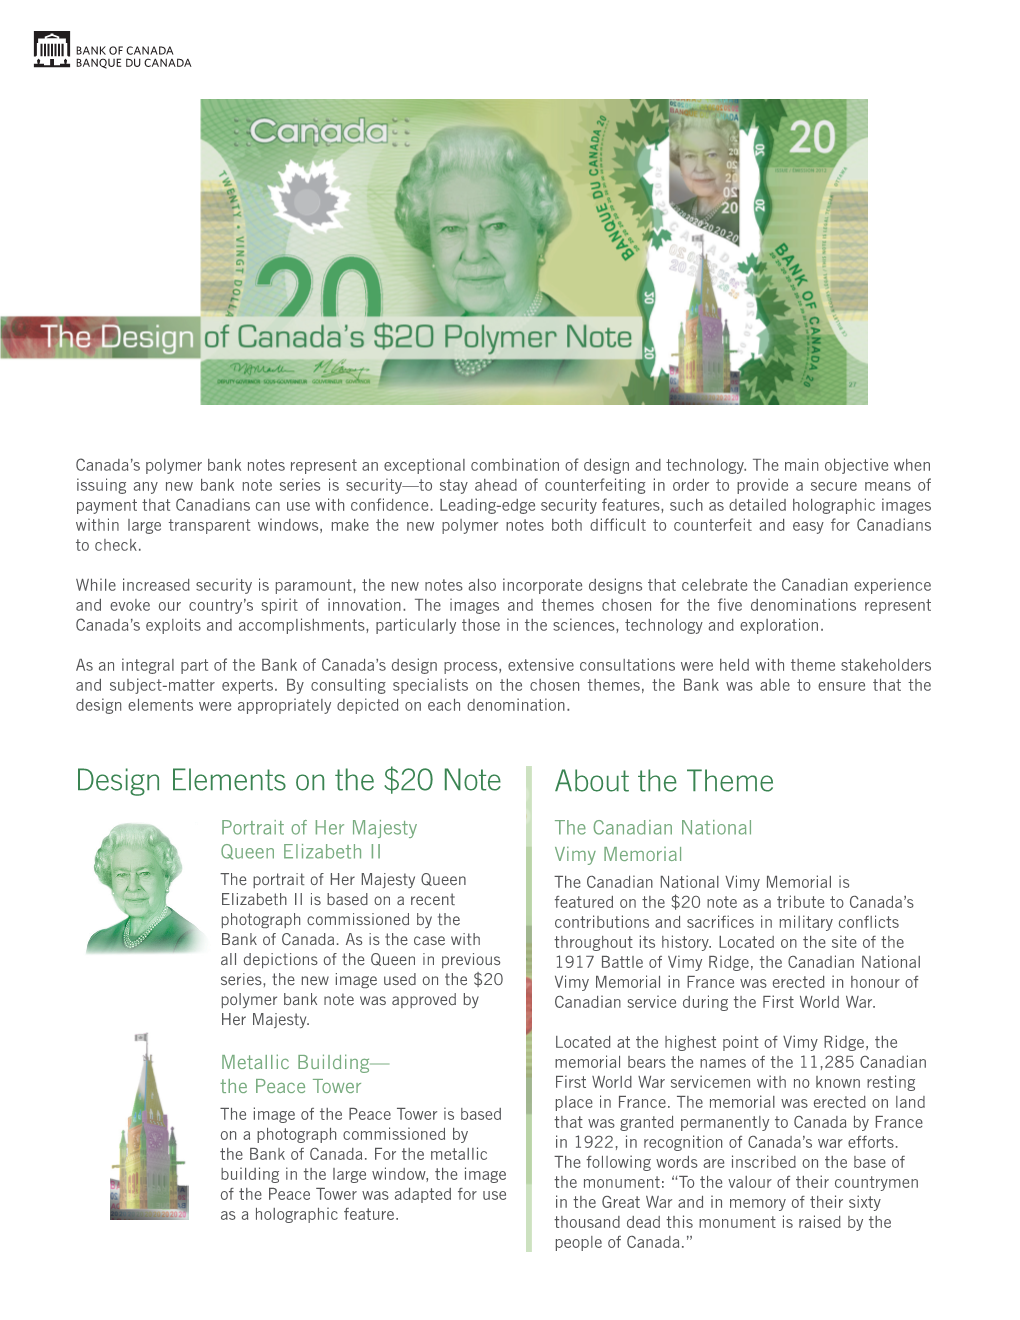 Design Elements on the $20 Note About the Theme